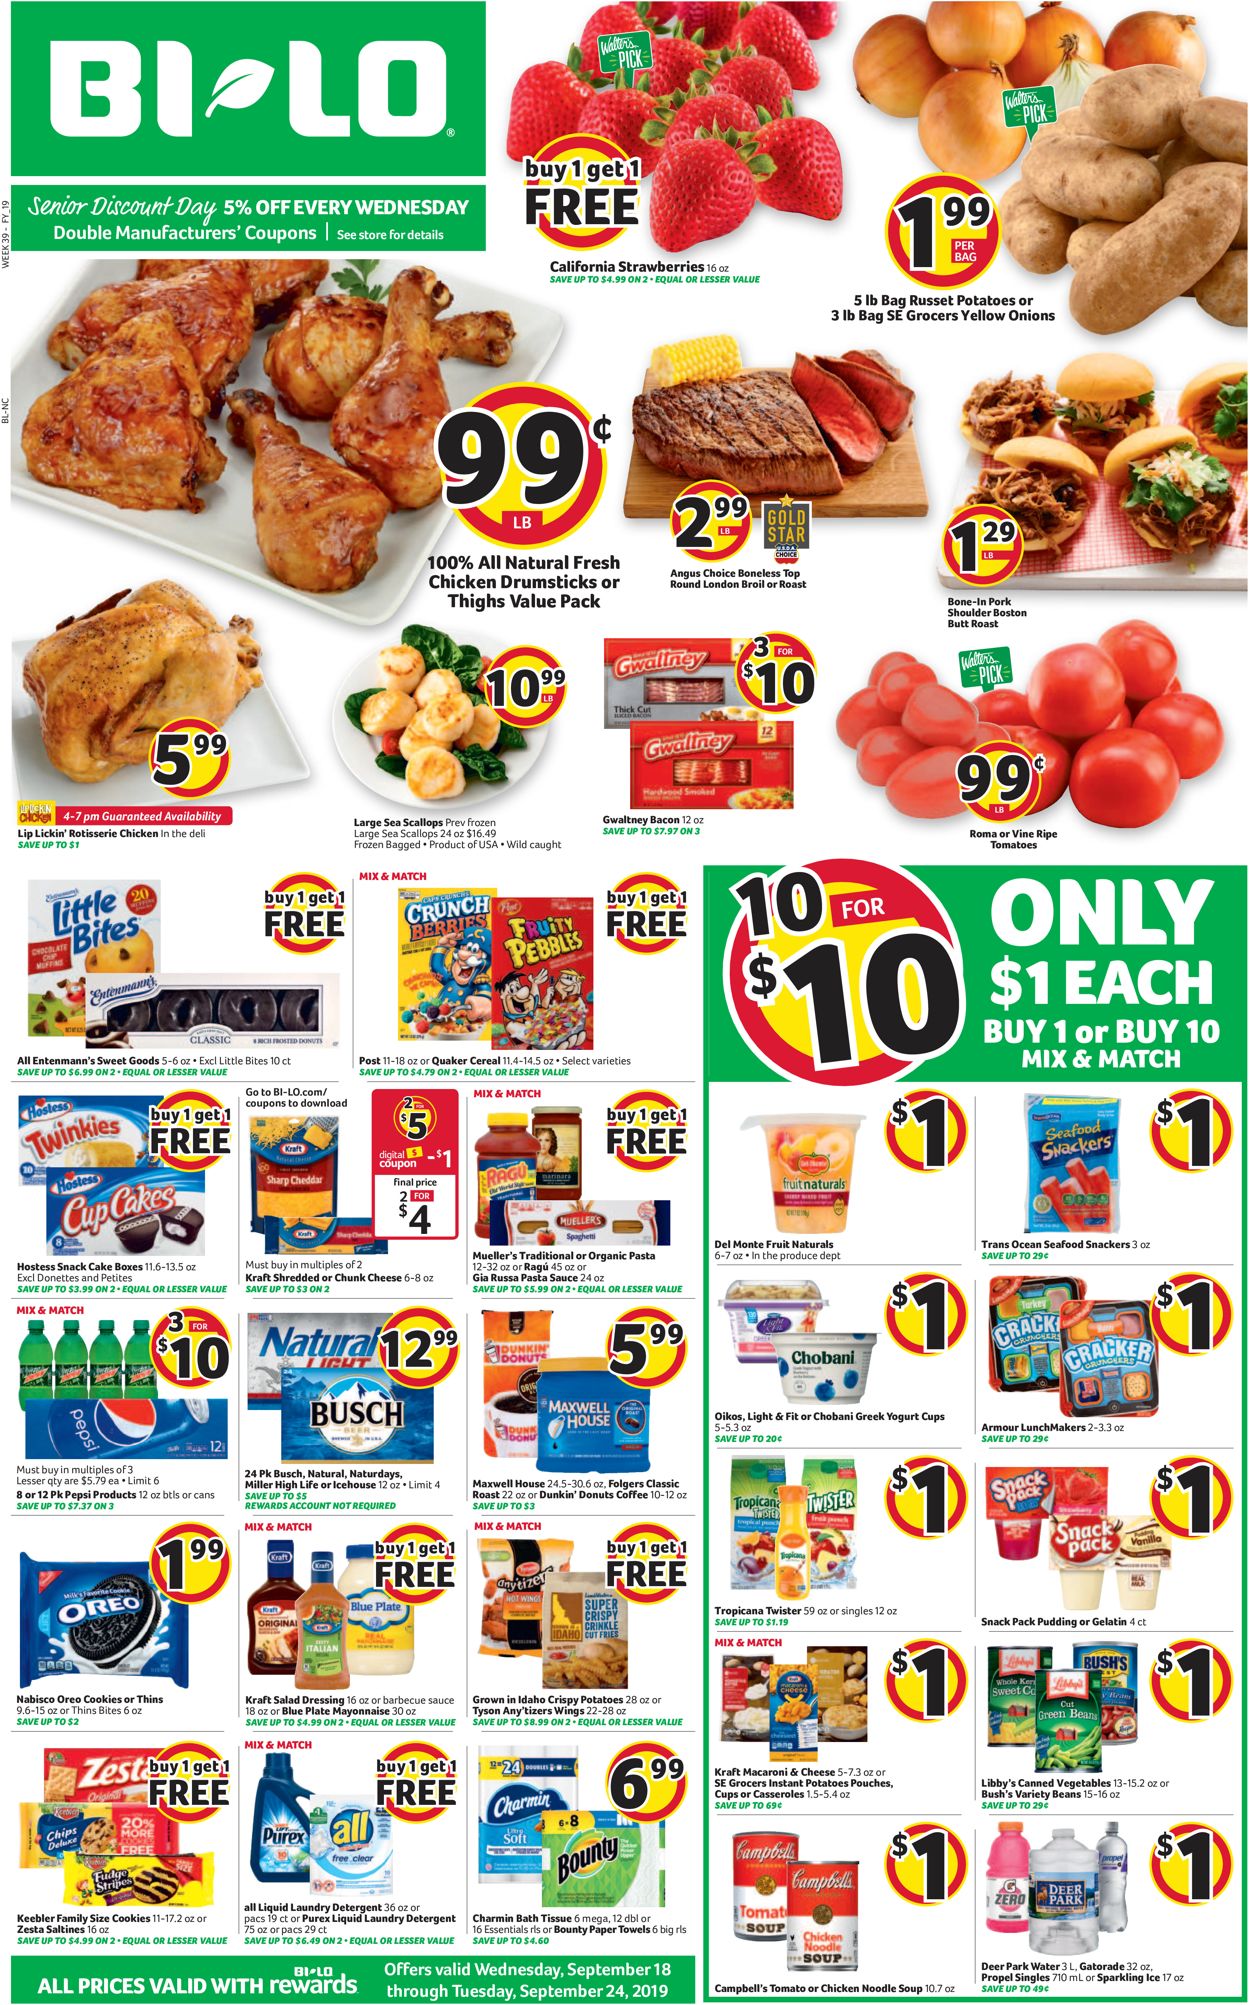 BI-LO Current weekly ad 09/18 - 09/24/2019 - frequent-ads.com